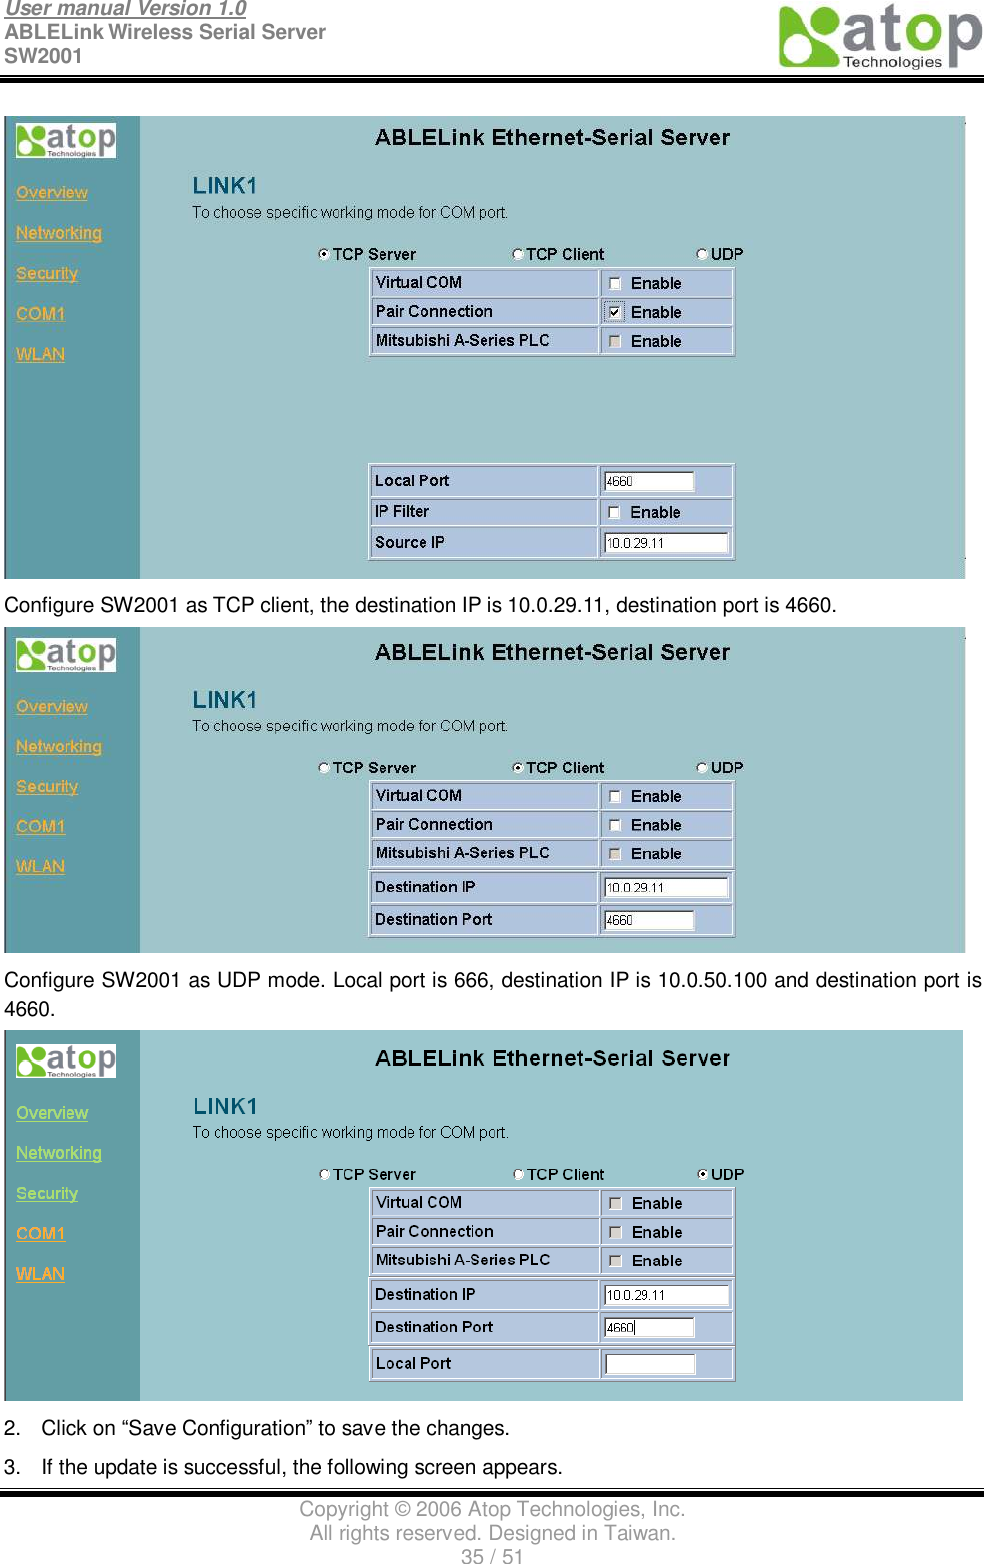 User manual Version 1.0 ABLELink Wireless Serial Server  SW2001                                                                                                                               Copyright © 2006 Atop Technologies, Inc. All rights reserved. Designed in Taiwan. 35 / 51    Configure SW2001 as TCP client, the destination IP is 10.0.29.11, destination port is 4660.  Configure SW2001 as UDP mode. Local port is 666, destination IP is 10.0.50.100 and destination port is 4660.  2. Click on “Save Configuration” to save the changes. 3. If the update is successful, the following screen appears. 